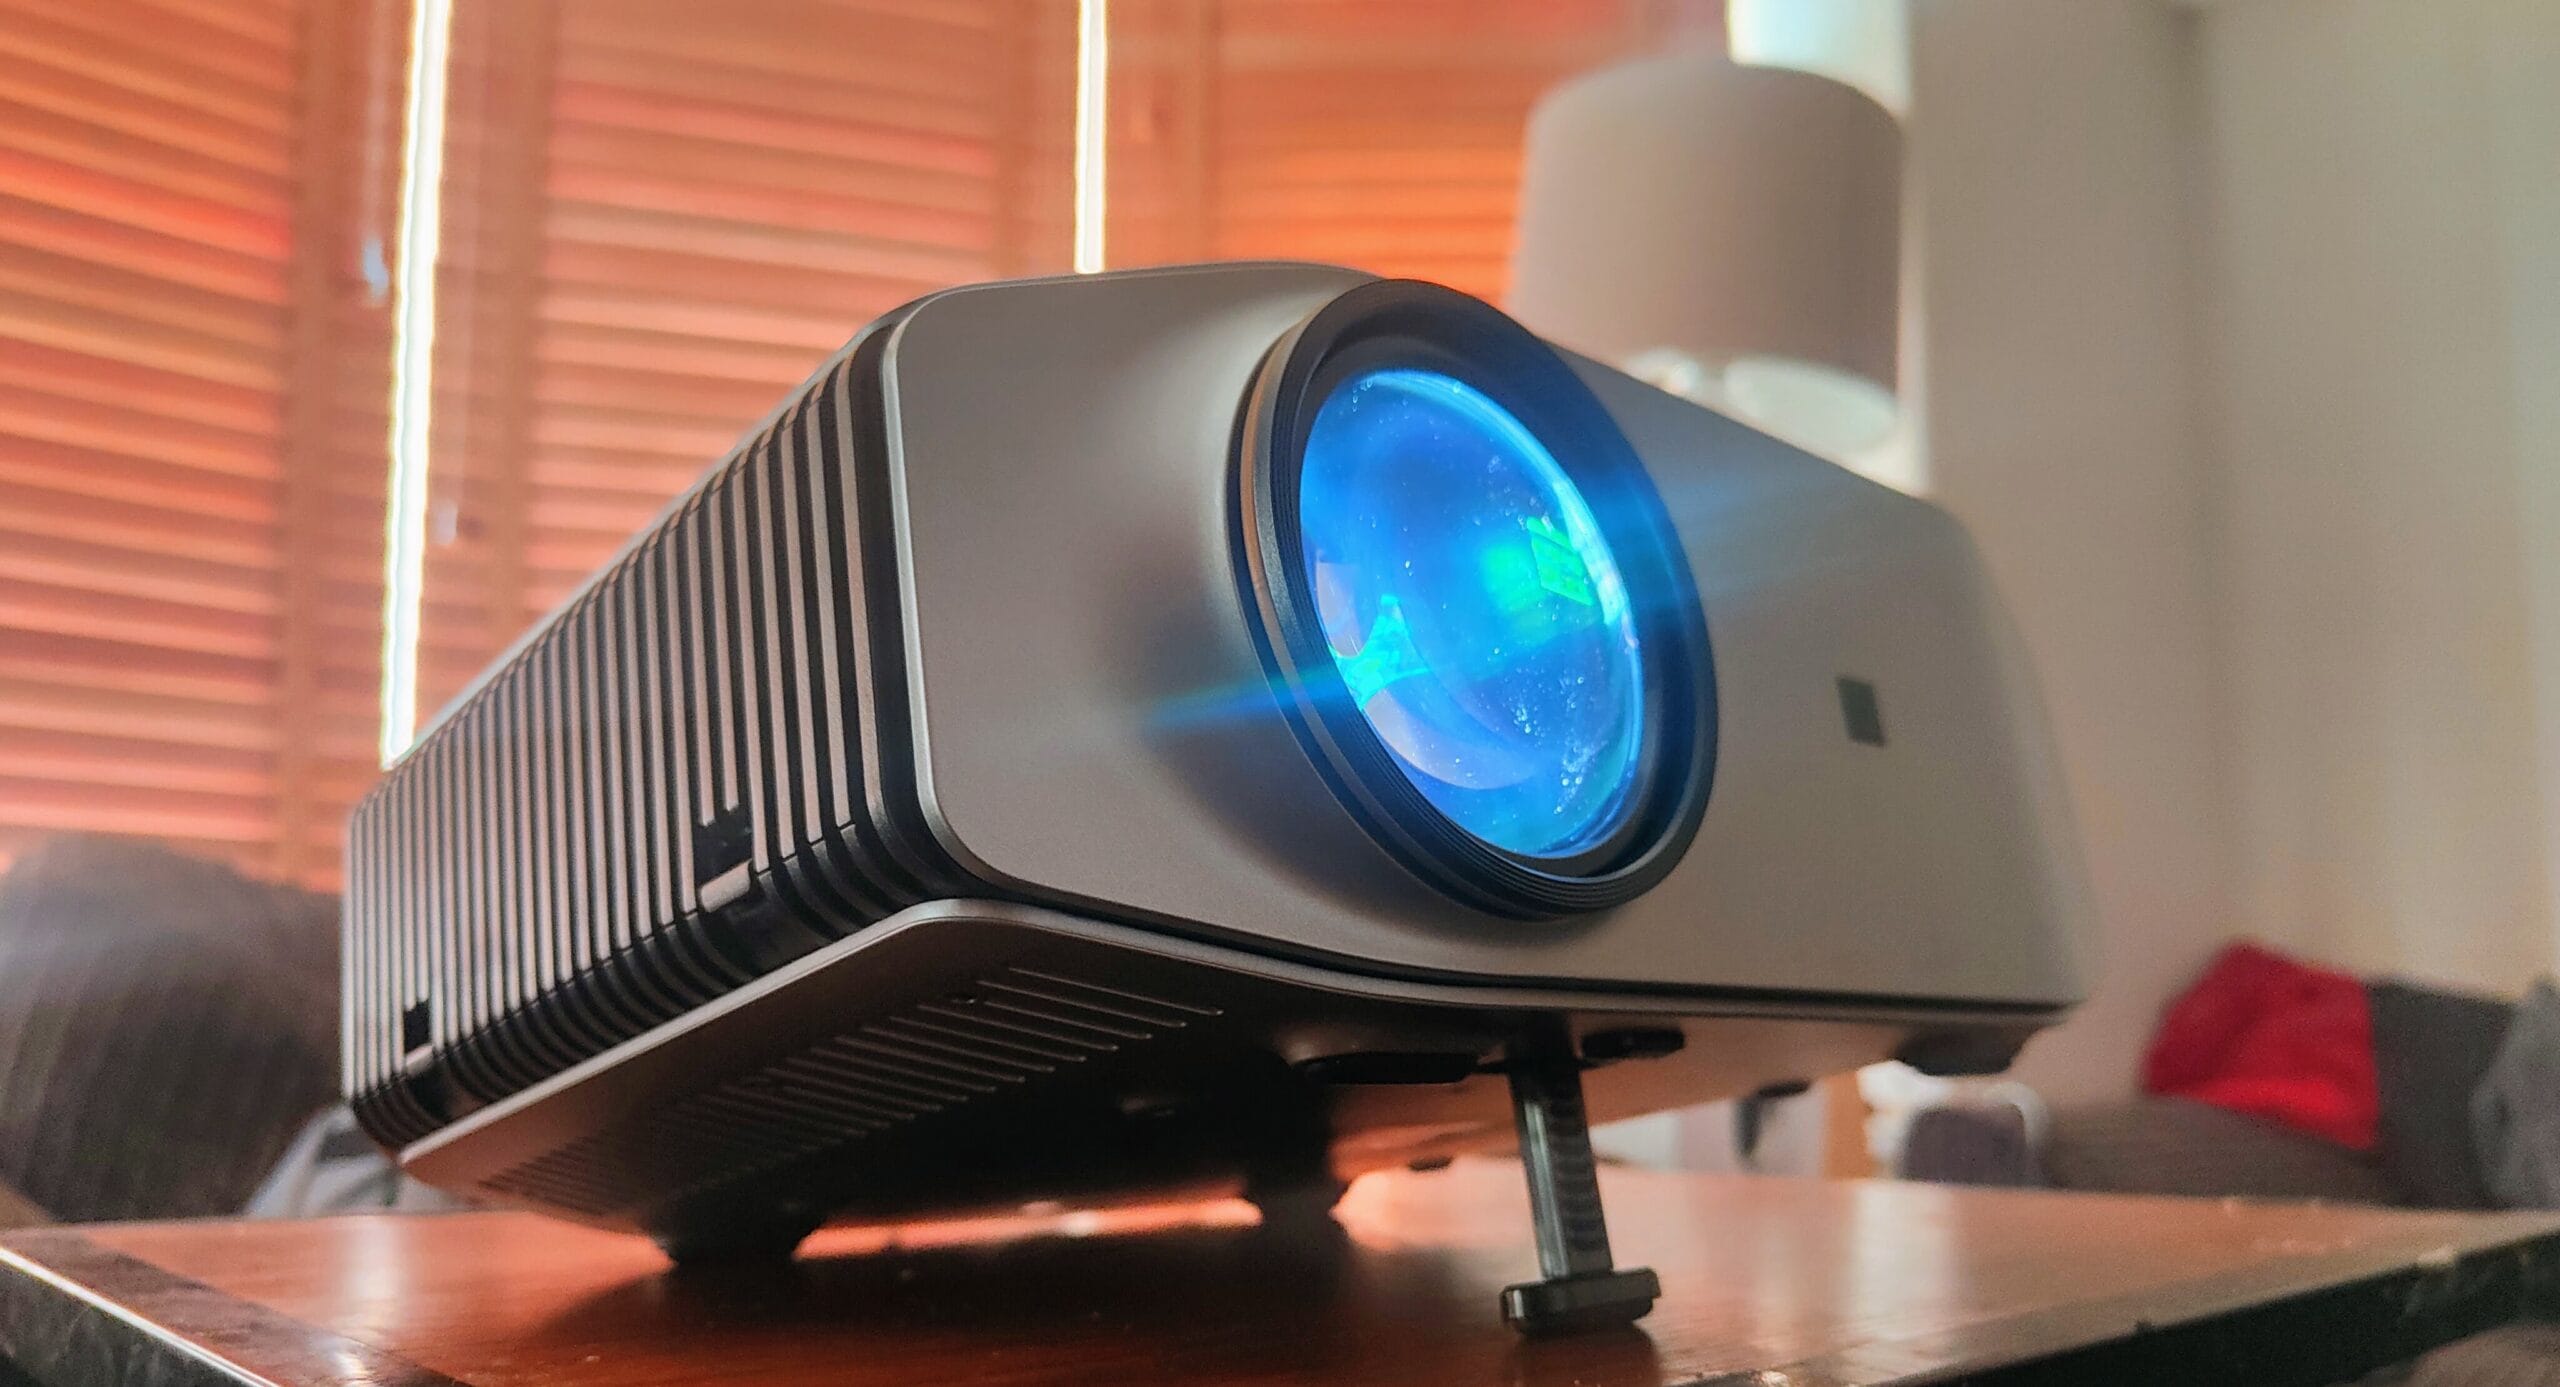 Vamvo L6200 Projector Review – A projector for a budget home cinema set-up